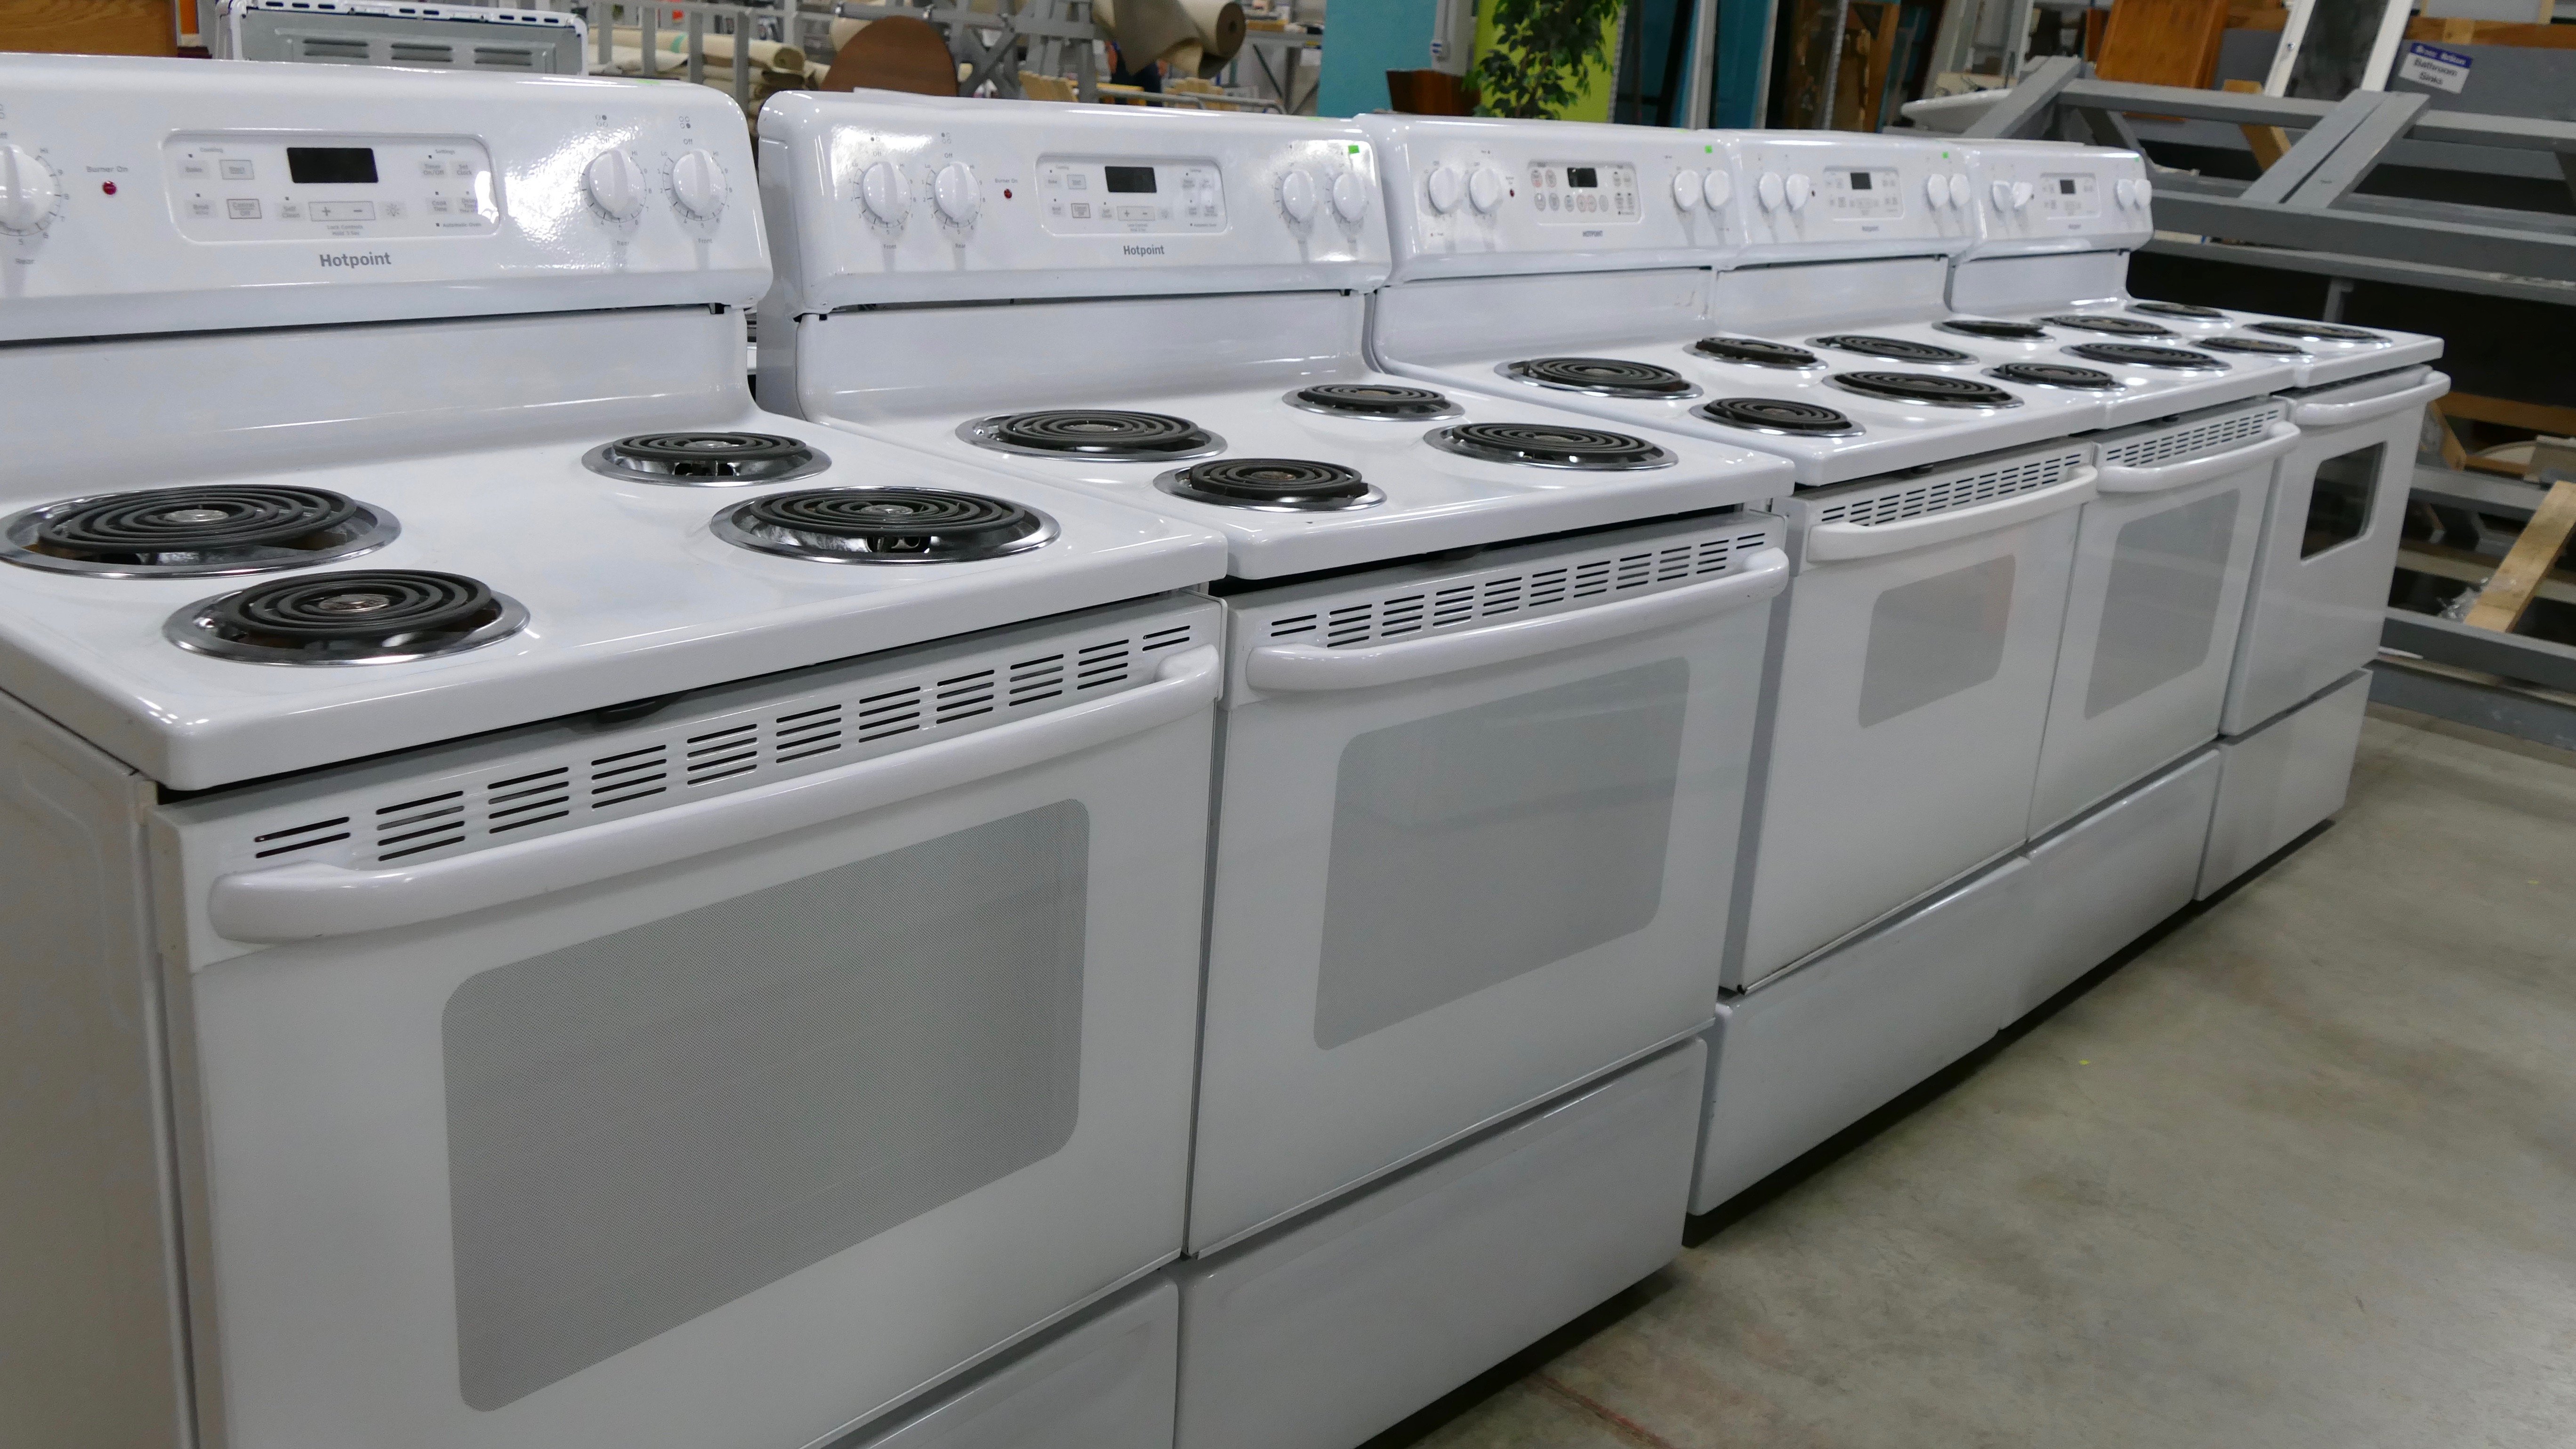 Restore Is The Place To Donate And Shop For Appliances